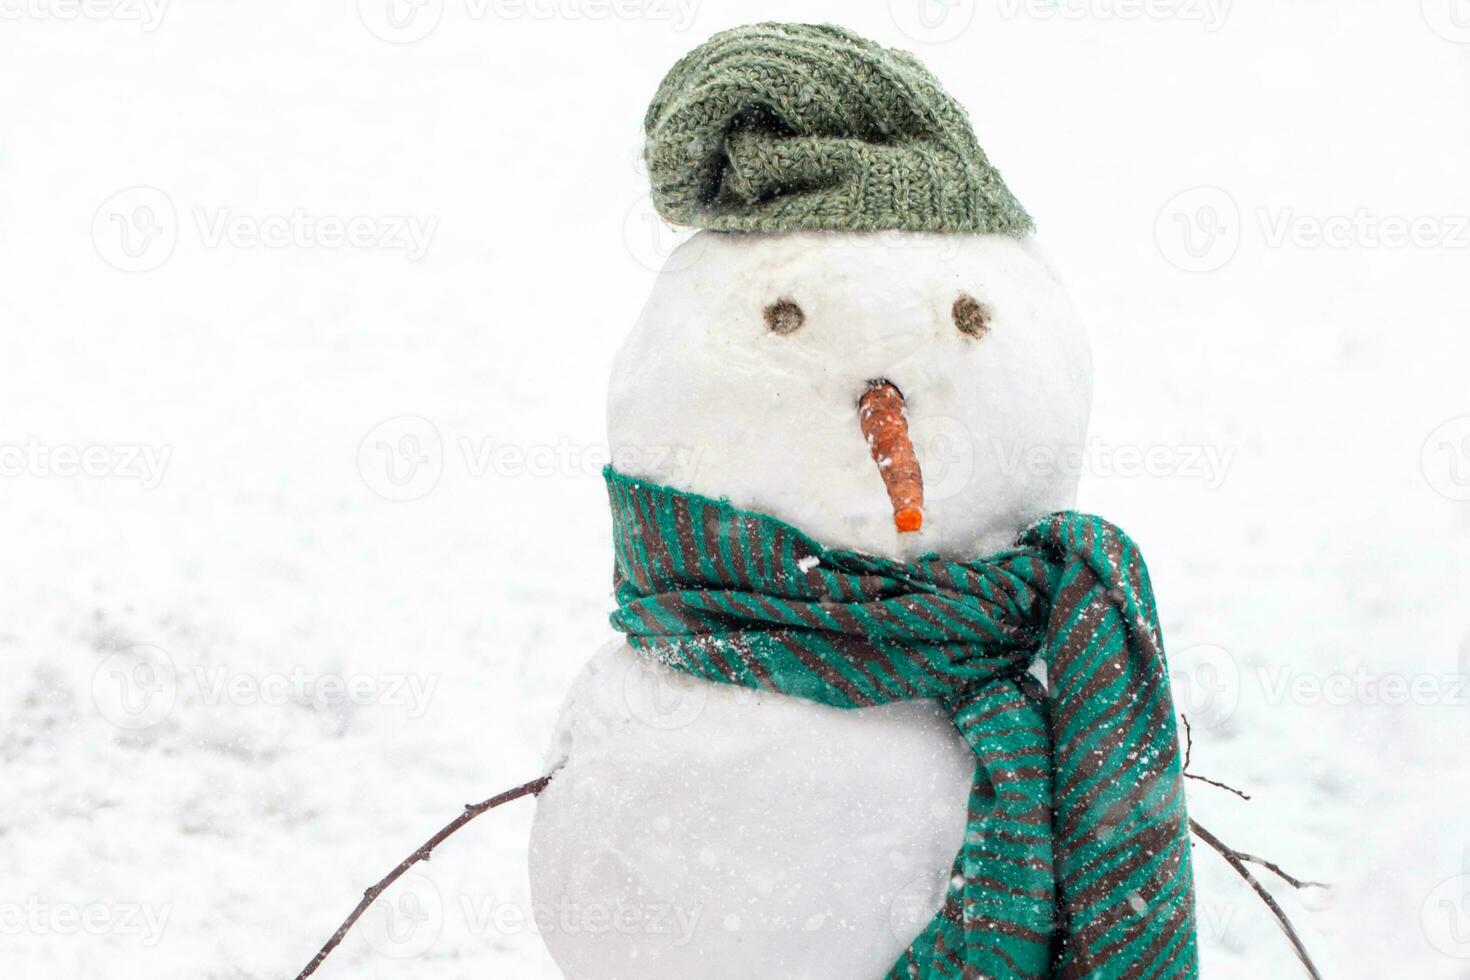 Snowman on background of snow drifts during snowfall in winter. snow figure with green knitted scarf and hat. photo